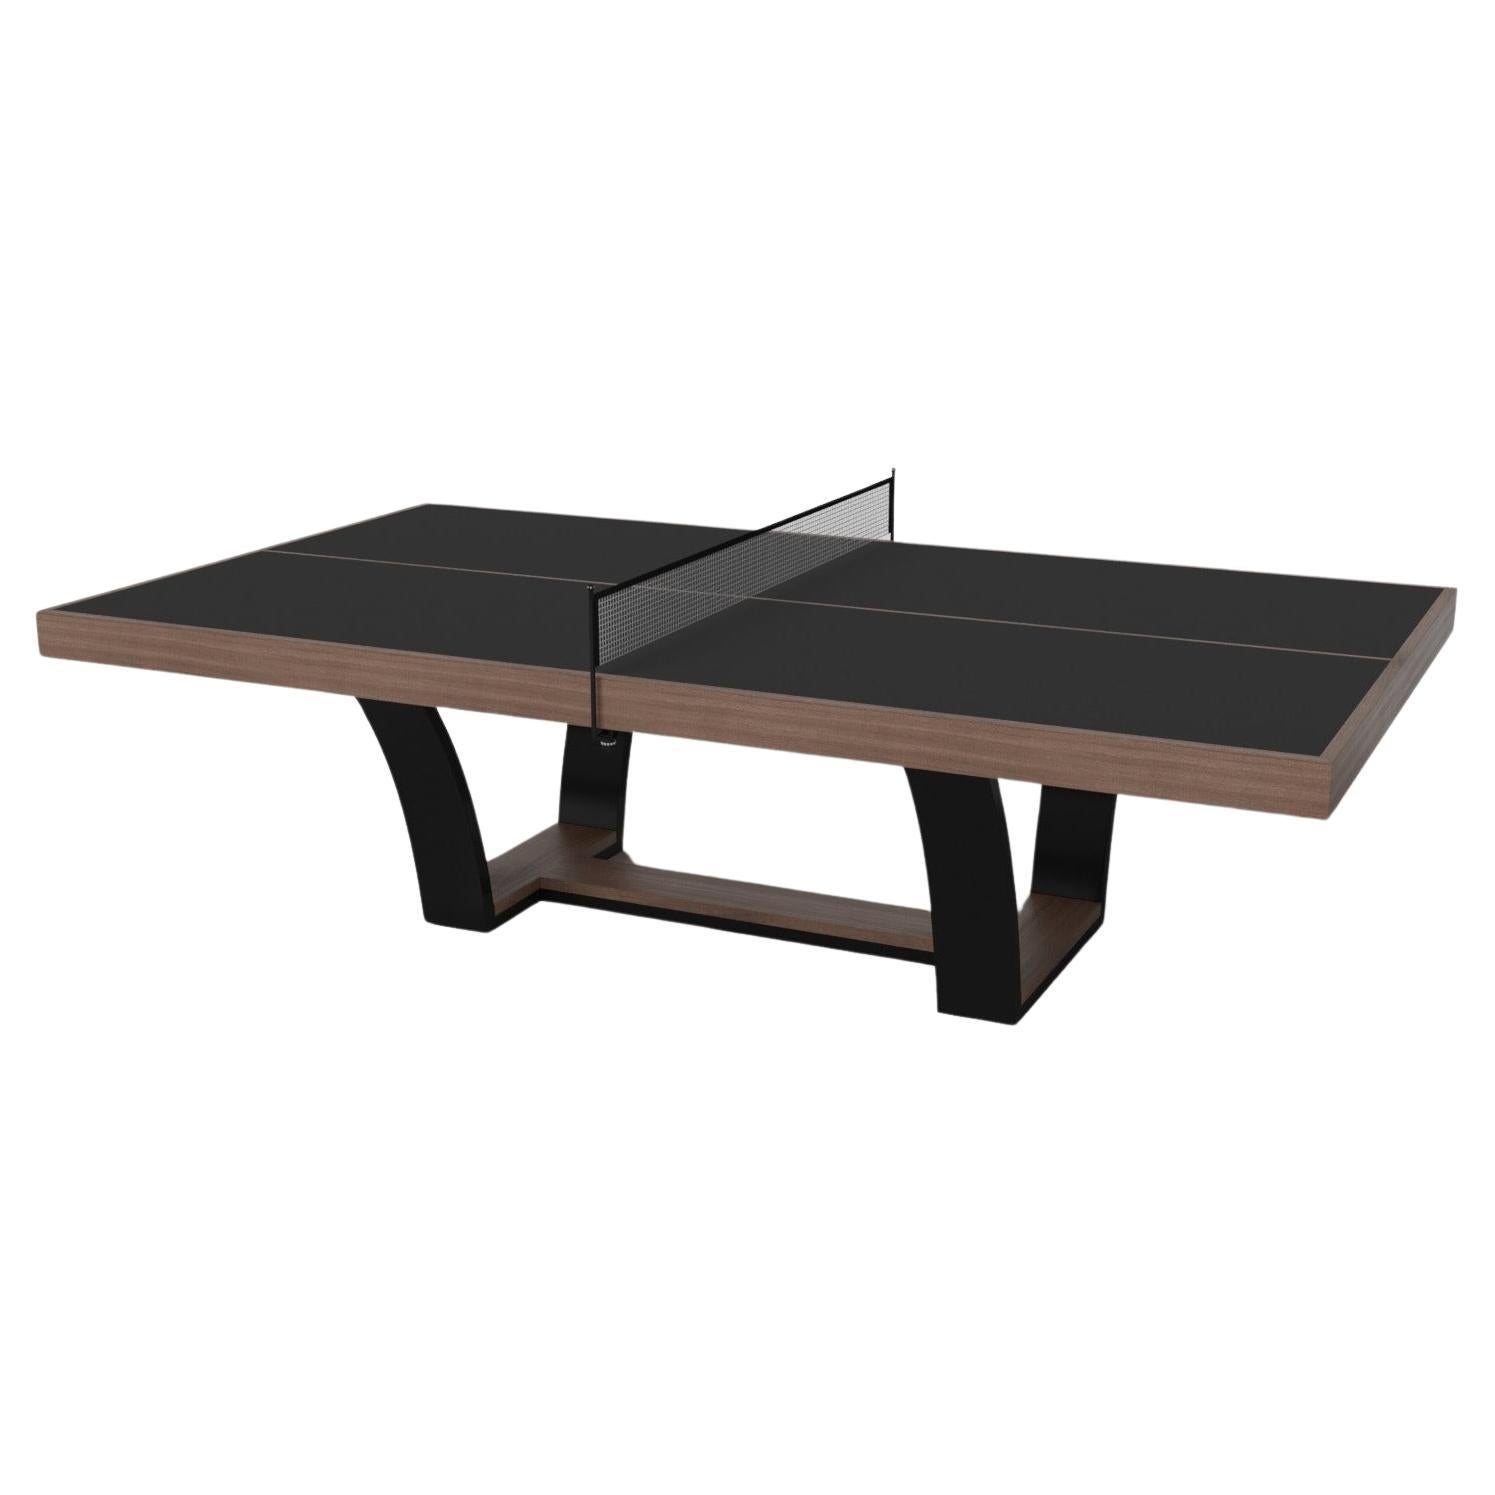 Elevate Customs Elite Tennis Table / Solid Walnut Wood in 9' - Made in USA For Sale